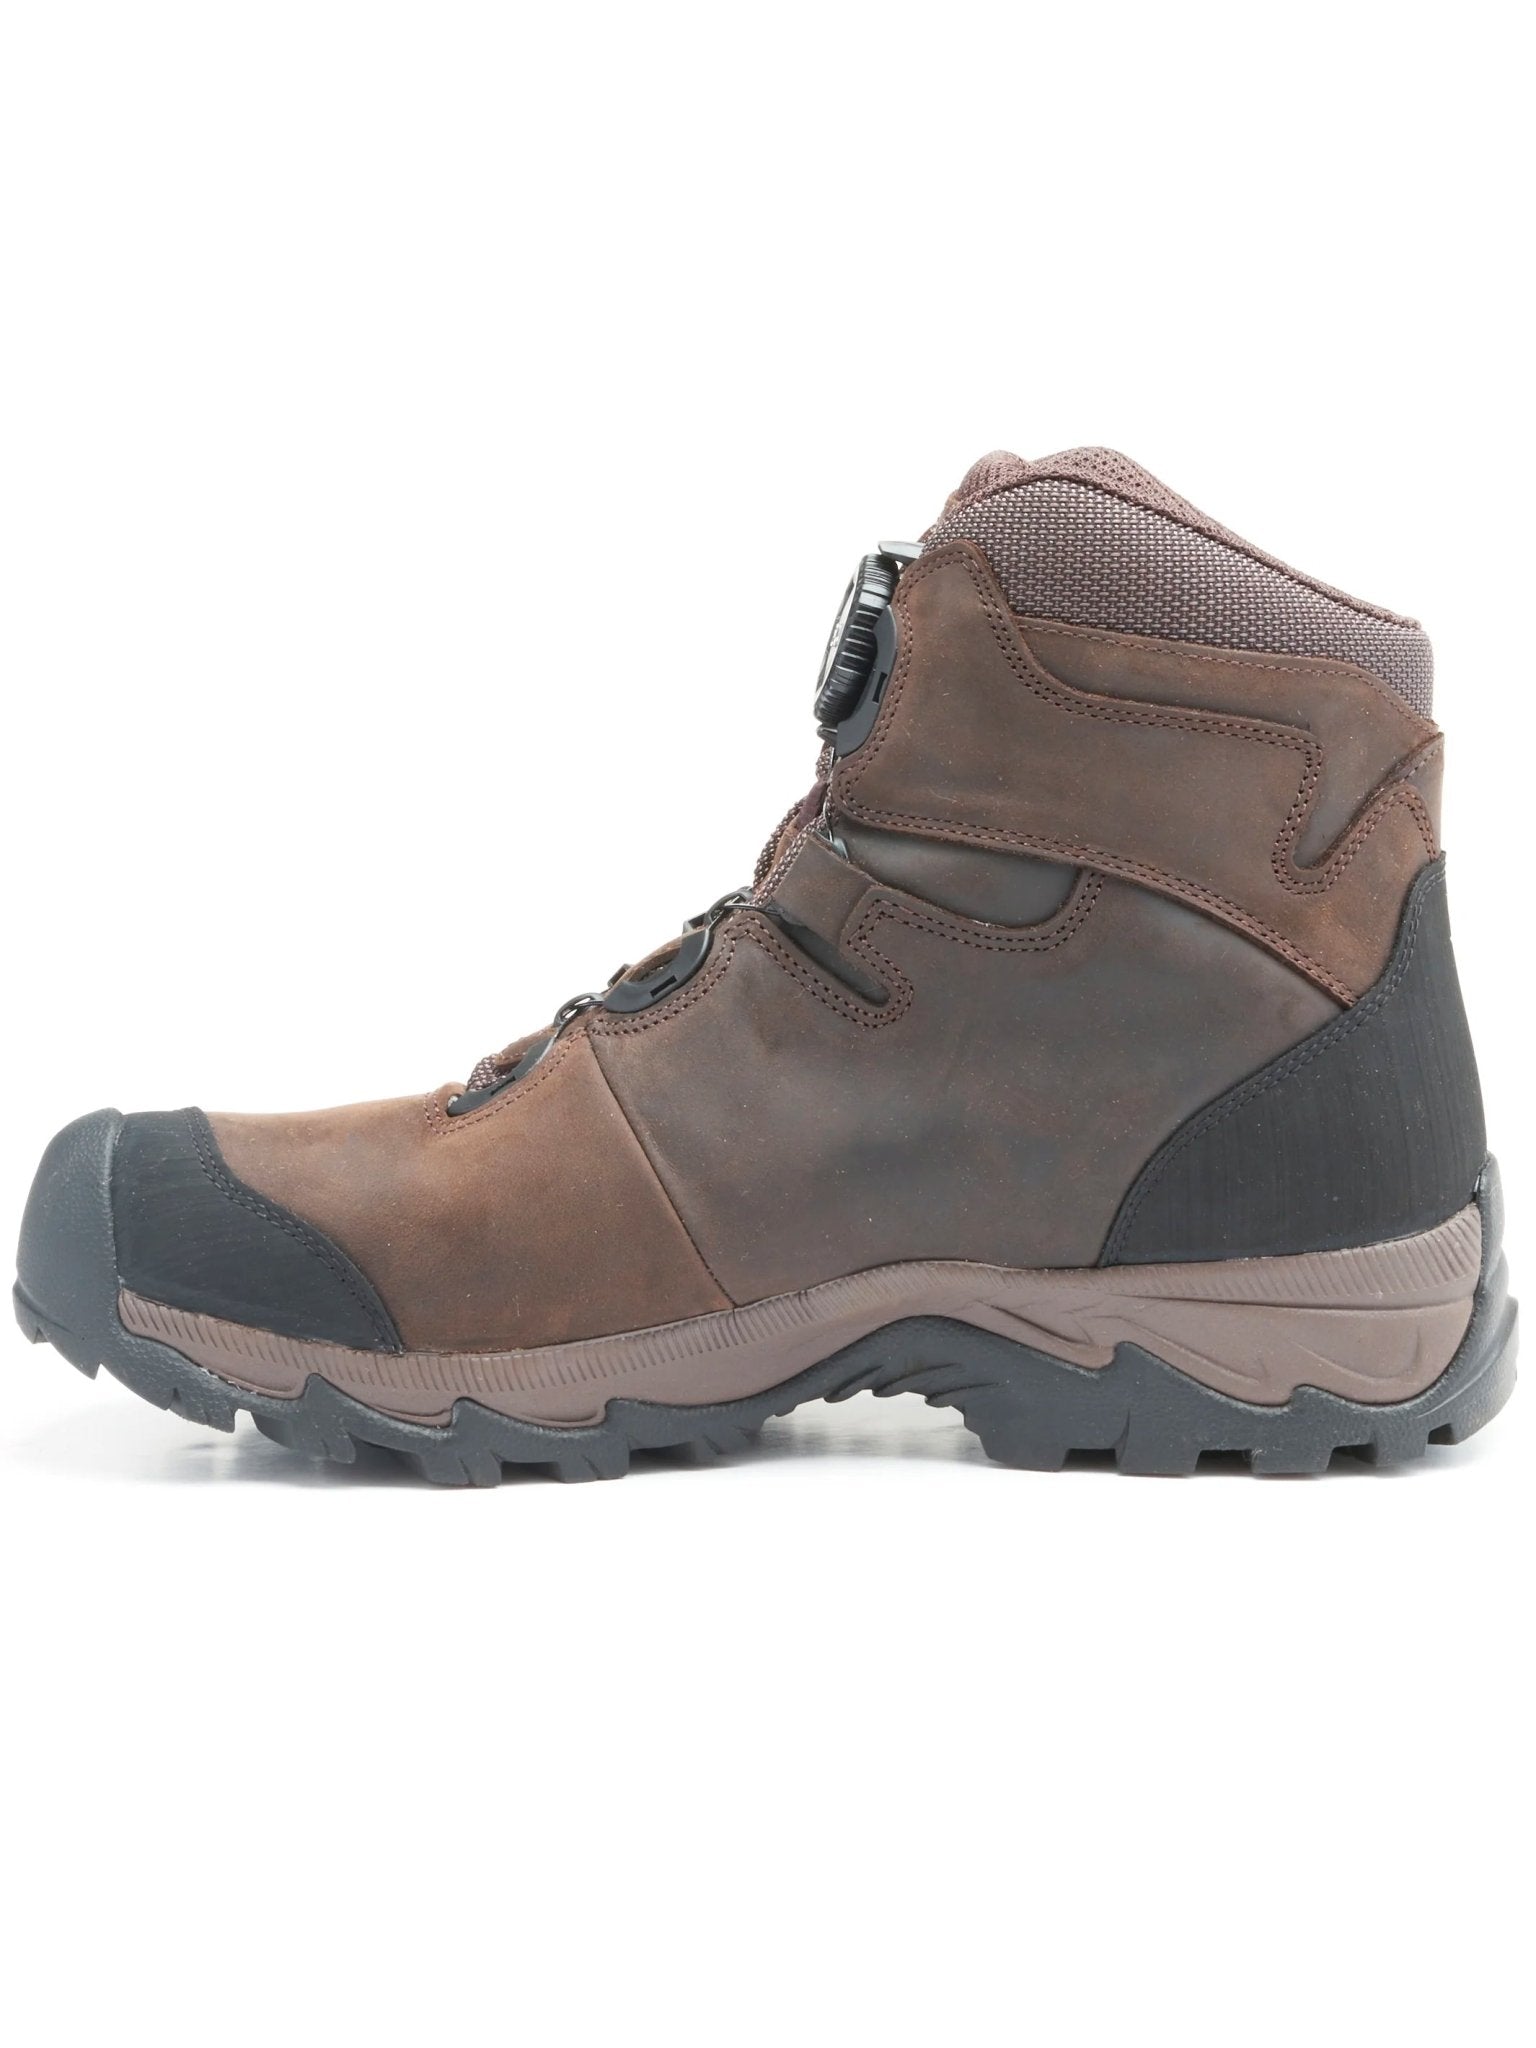 4elementsclothingTrekstaTreksta - Winchester 6" Gore-Tex Waterproof Boot, Boa Lace up system, Leather boot with Nestfit and IcelockBoots750122562251